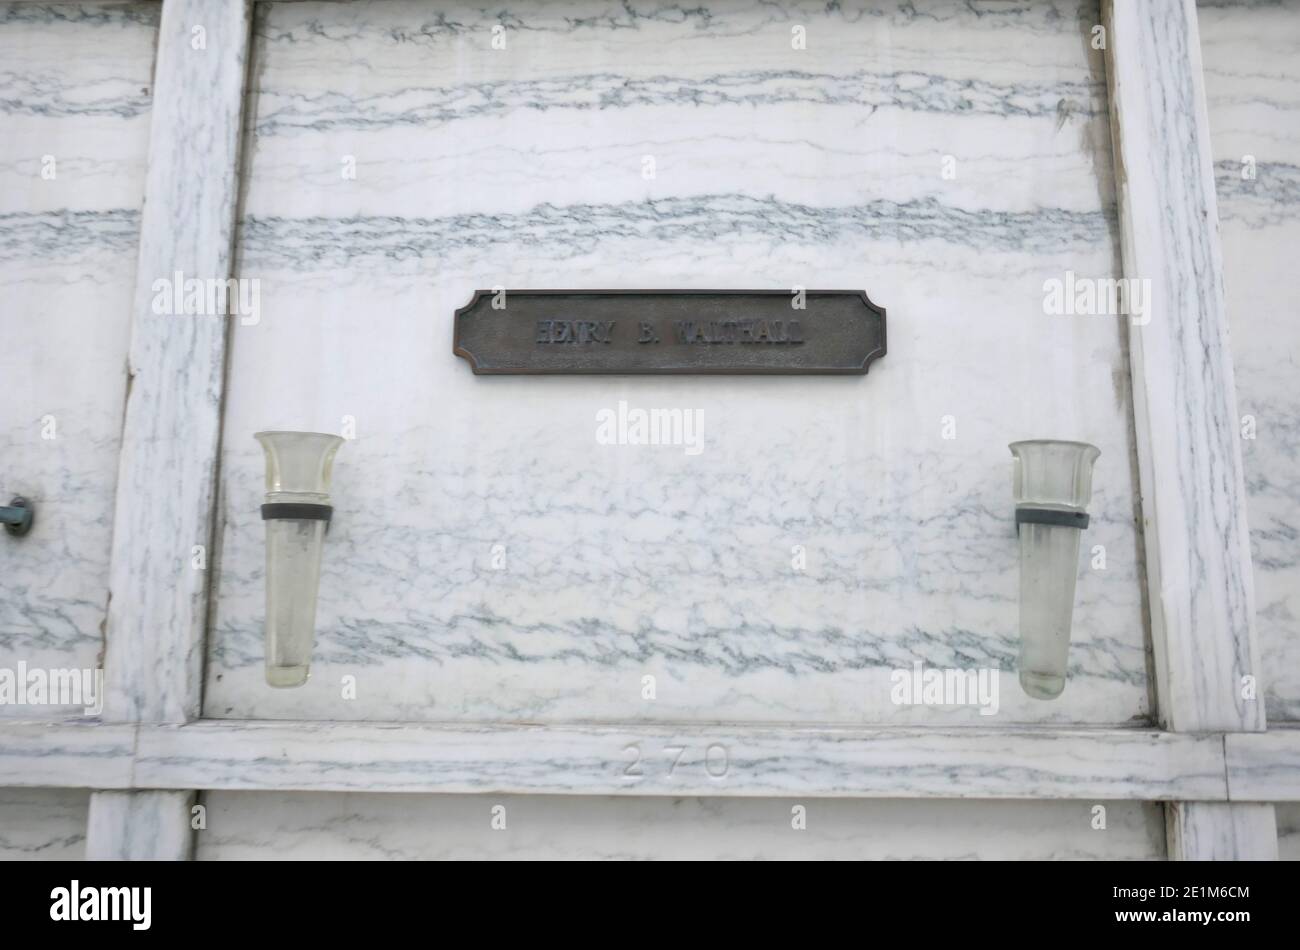 Los Angeles, California, USA 31st December 2020 A general view of atmosphere of actor Henry B. Walthall's Grave in Abbey of the Psalms at Hollywood Forever Cemetery on December 31, 2020 in Los Angeles, California, USA. Photo by Barry King/Alamy Stock Photo Stock Photo